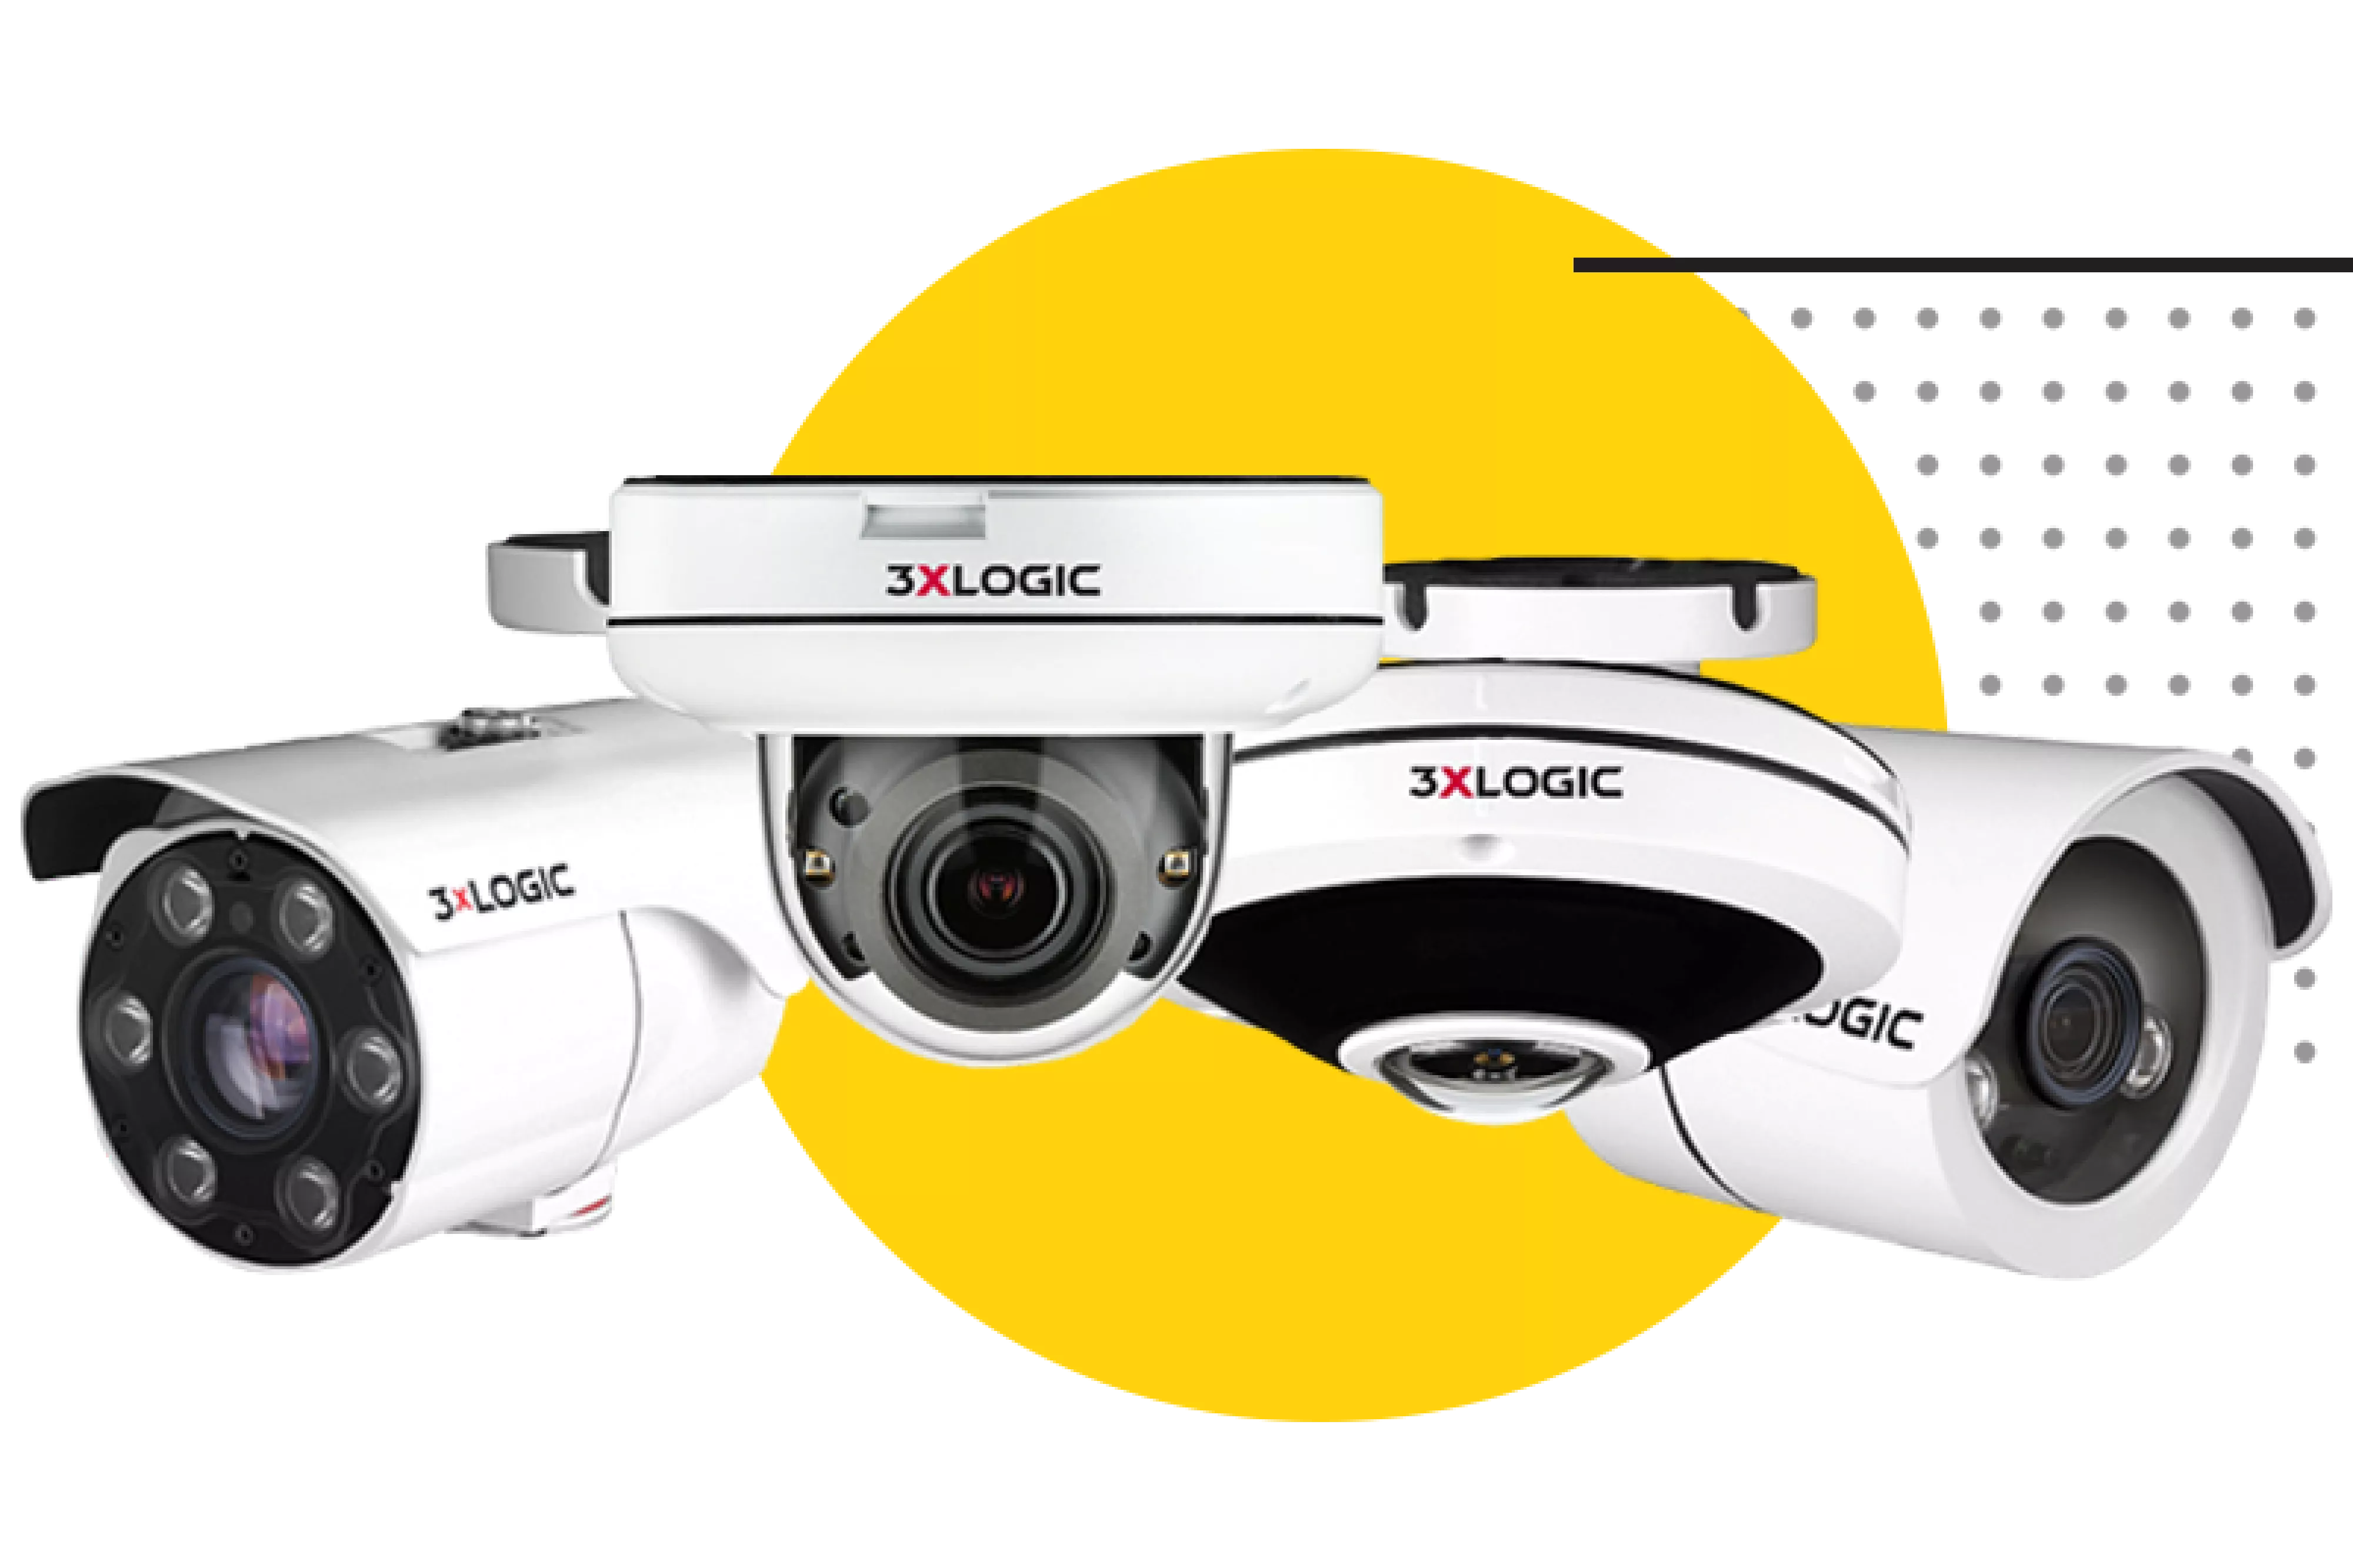 Four 3xLOGIC cameras with yellow circle graphic behind them